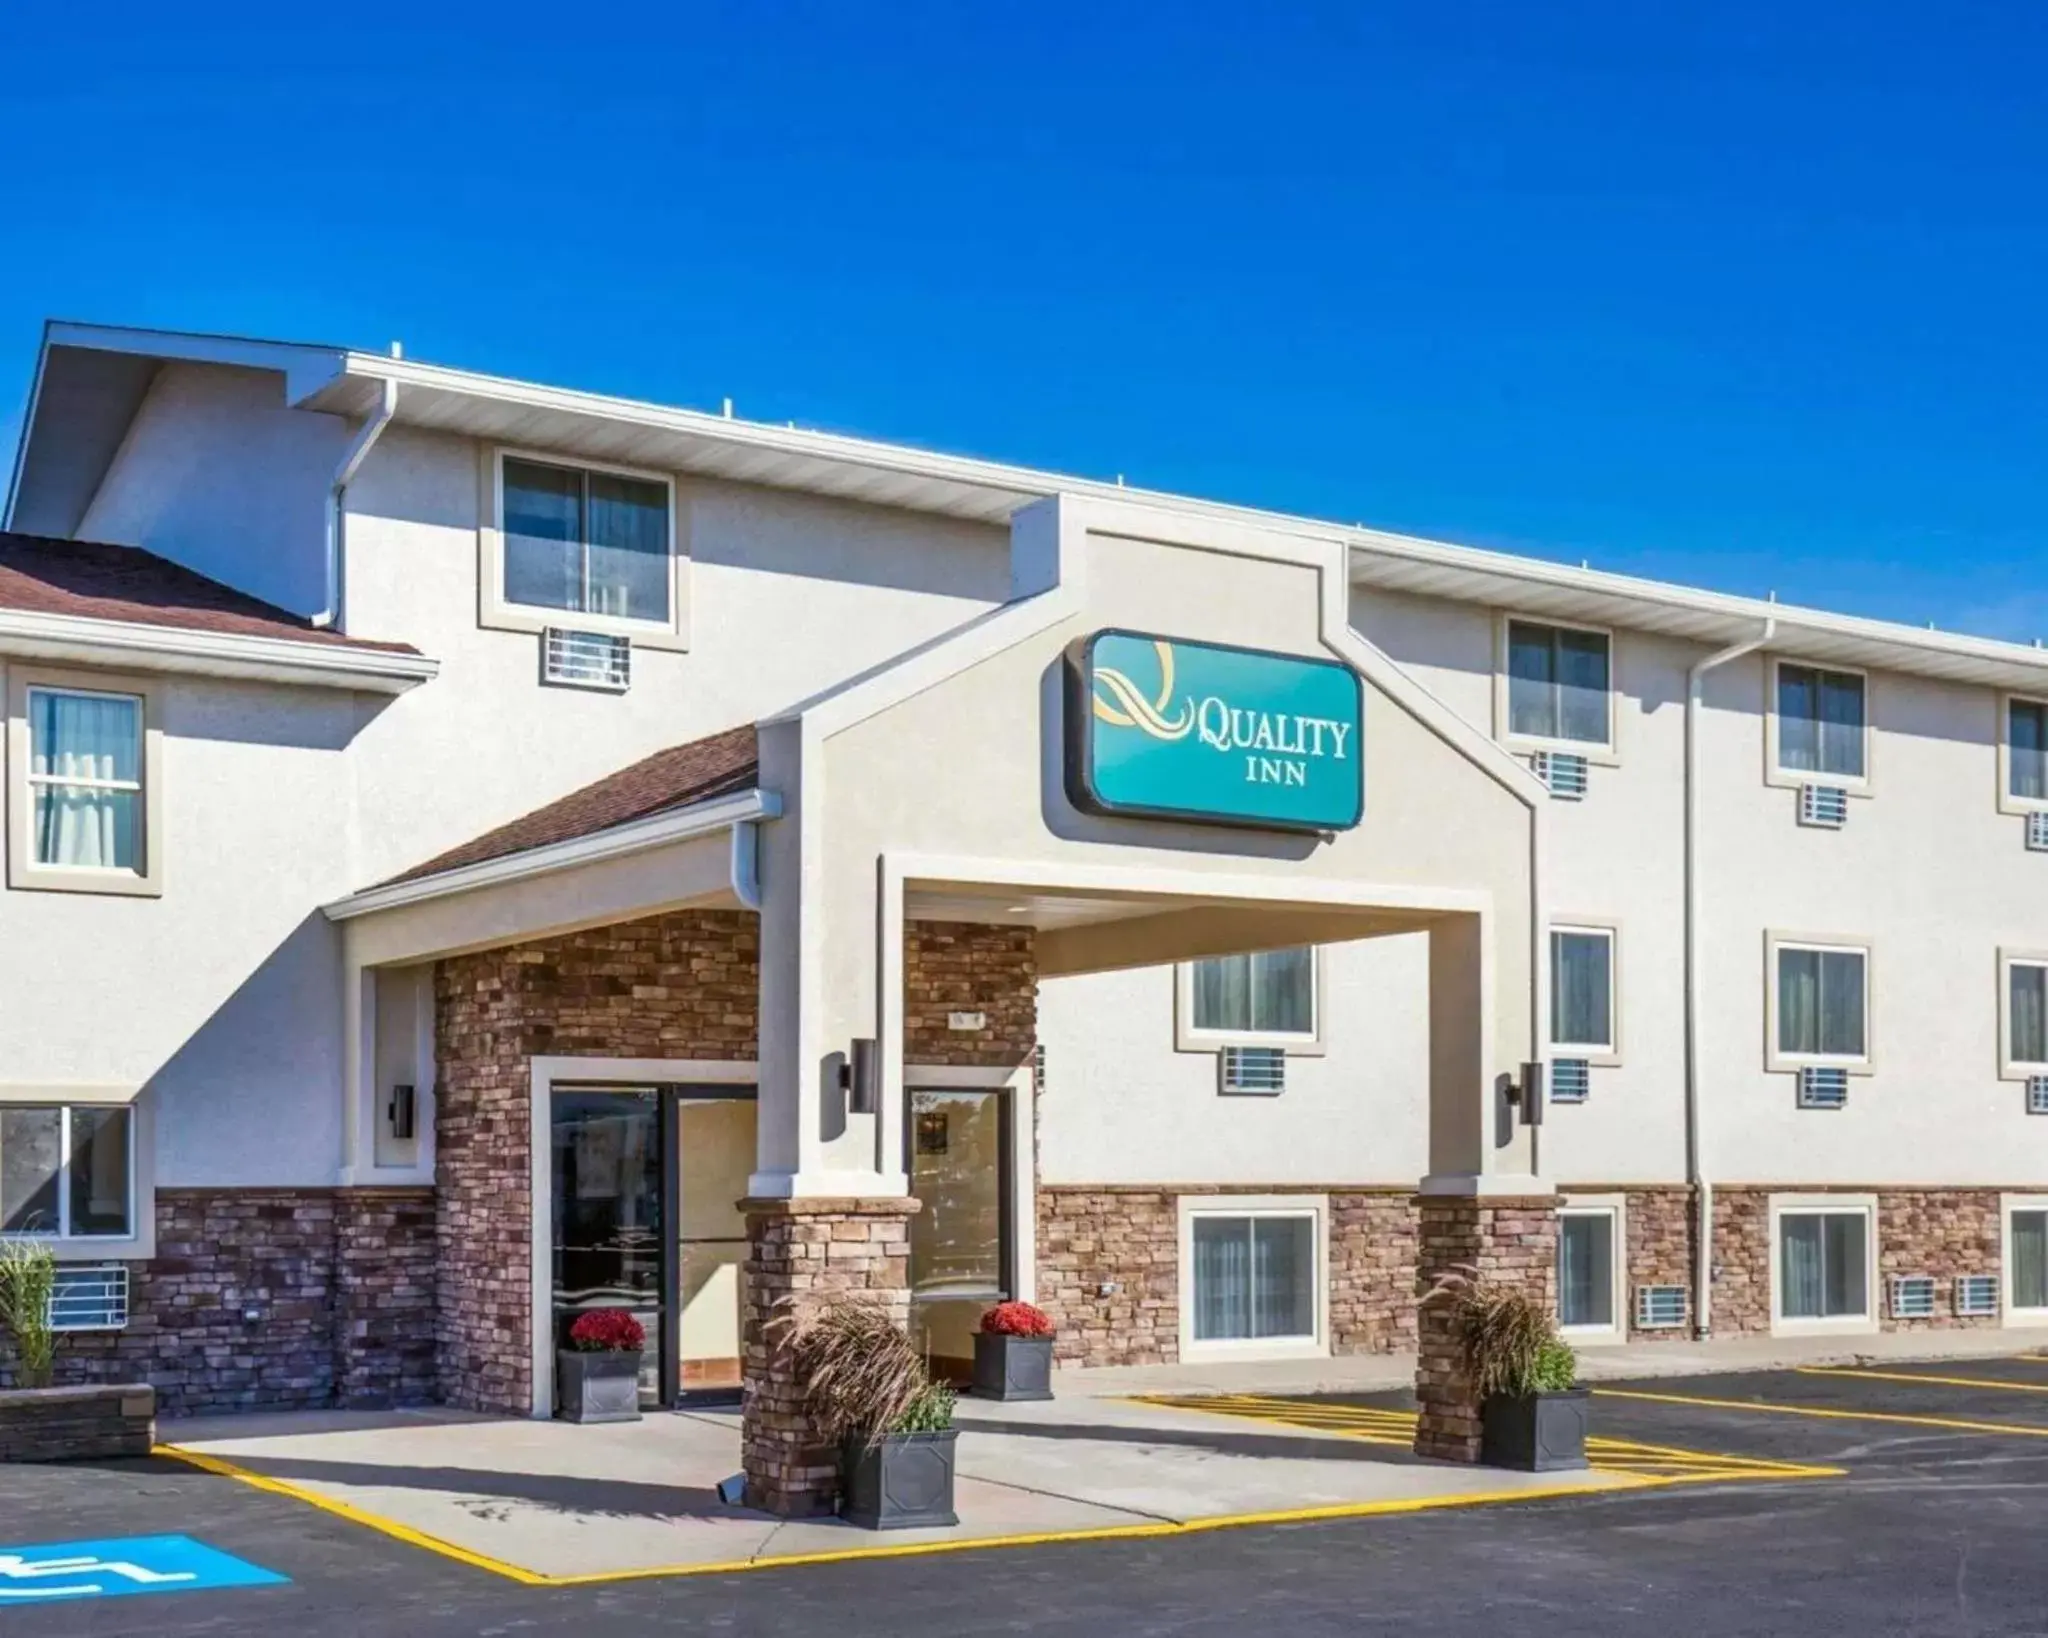 Property Building in Quality Inn Gillette